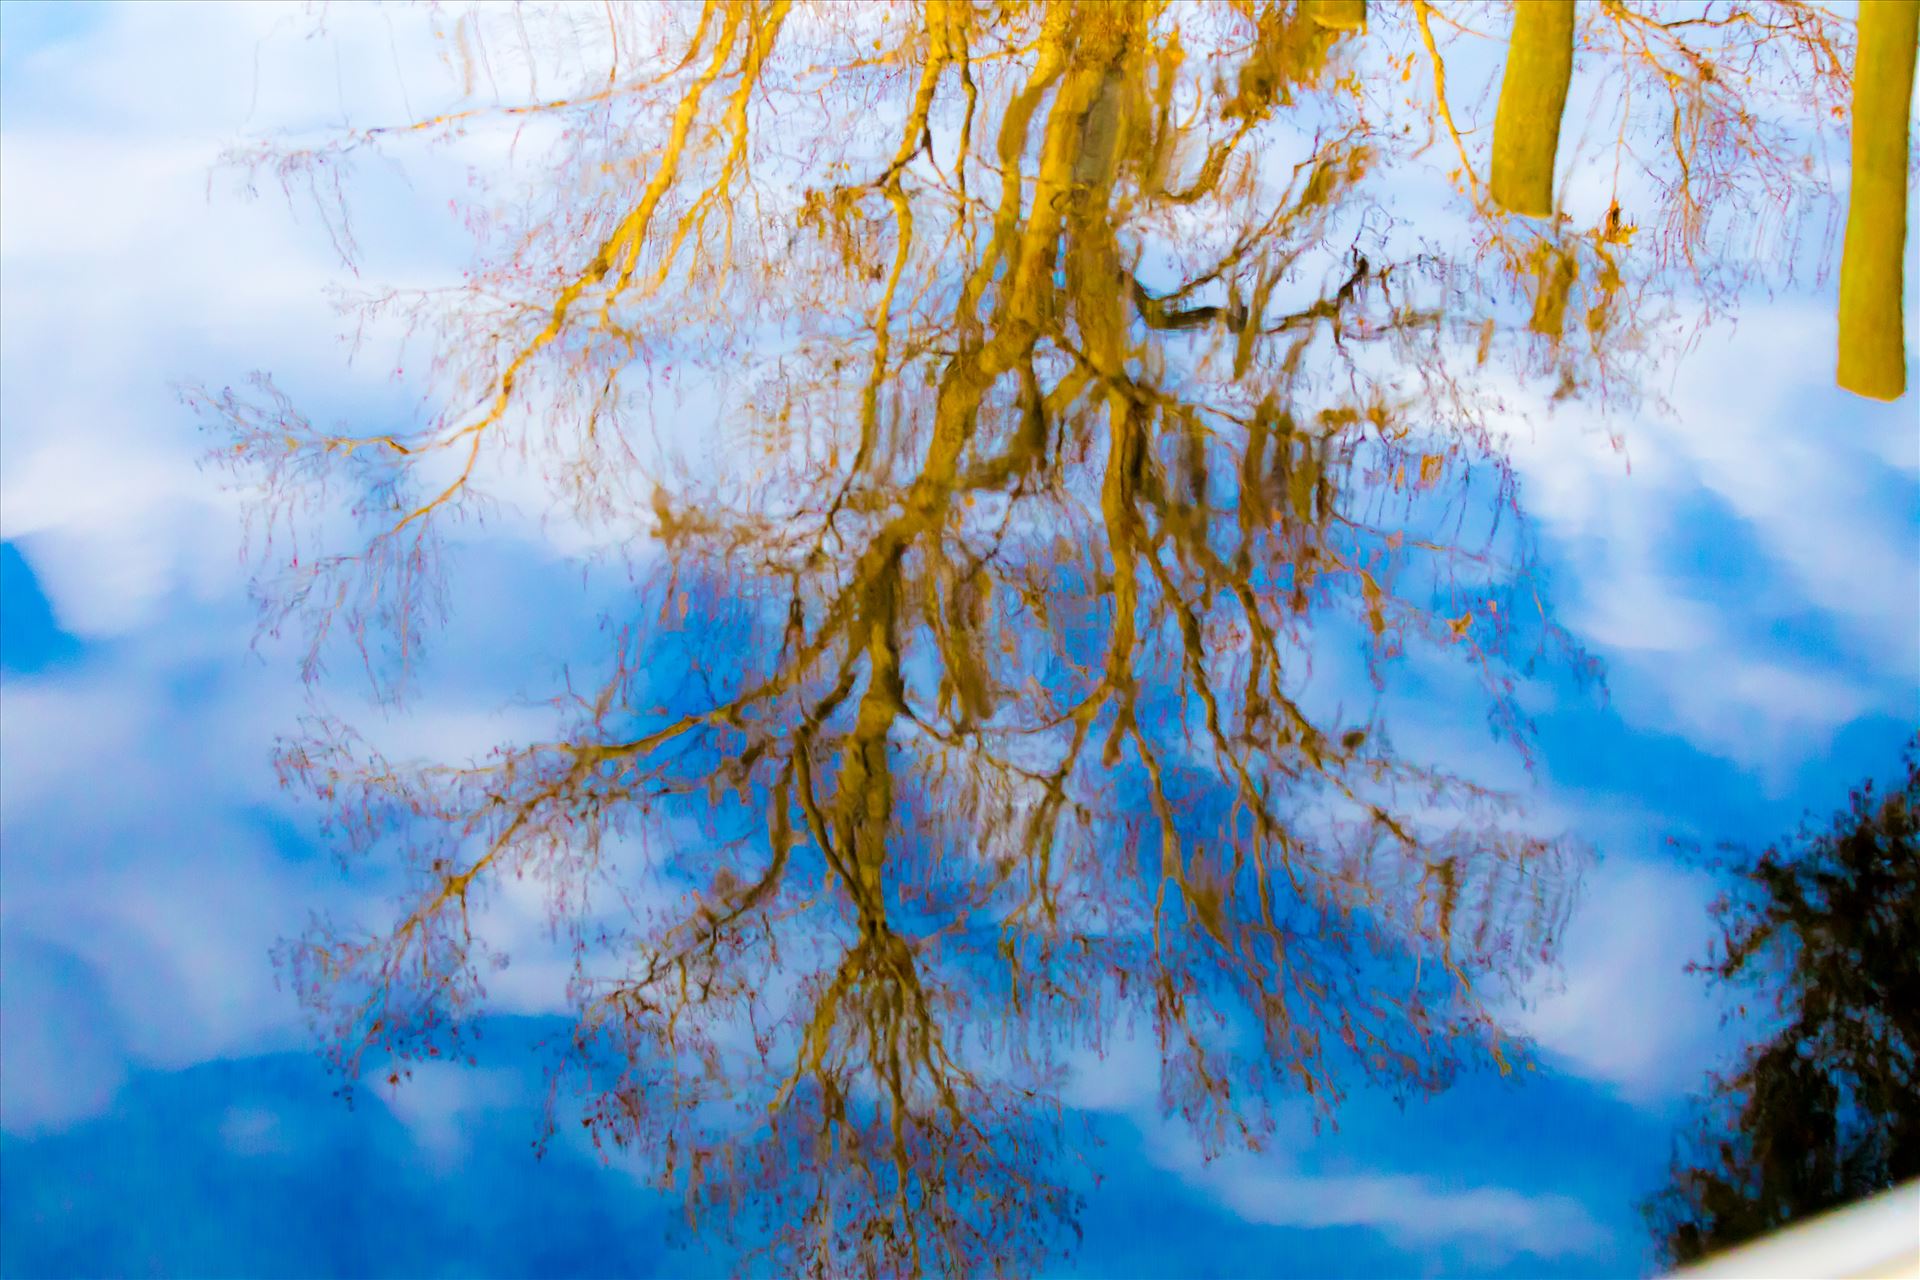 Reflections-4.jpg Blue Sky tree reflection on the water by Cat Cornish Photography